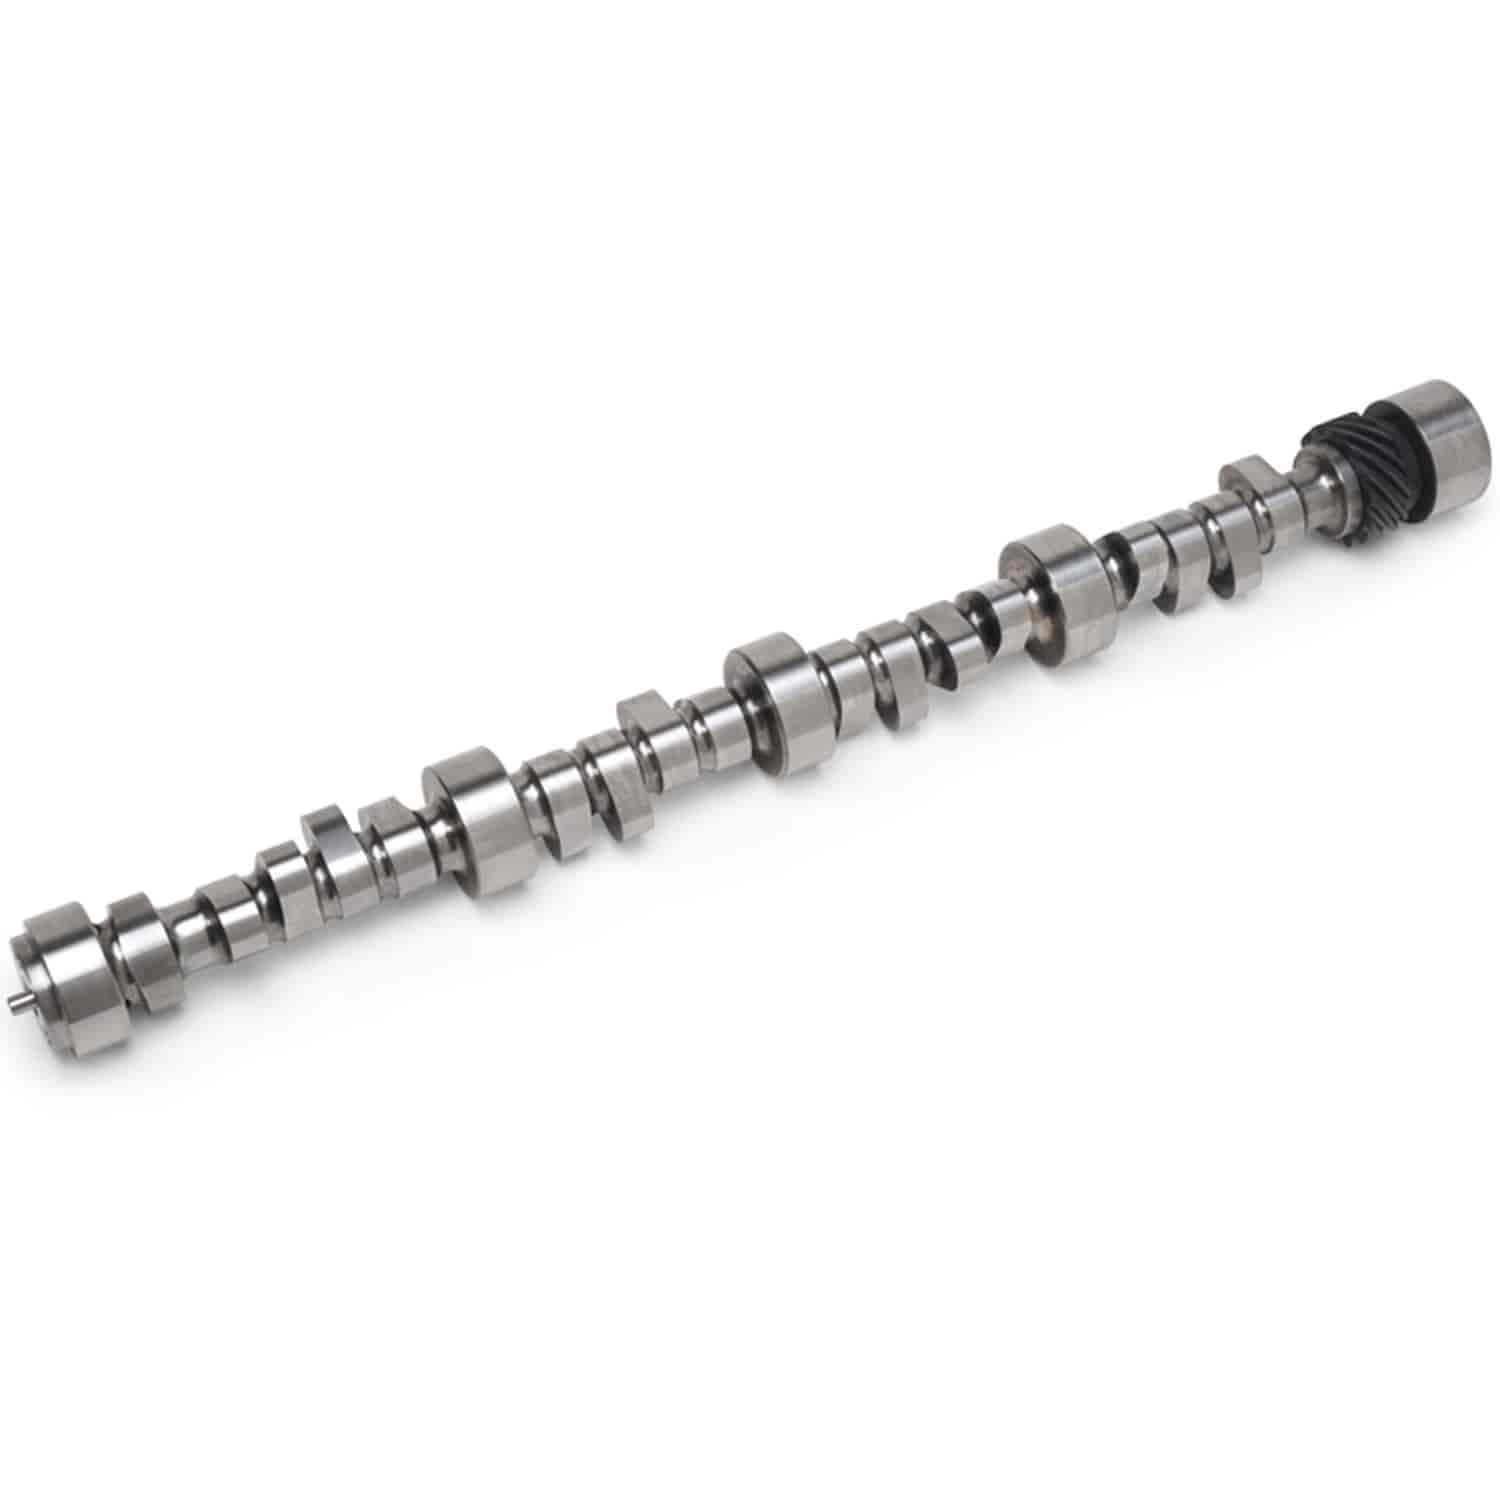 Rollin' Thunder Hydraulic Roller Camshaft for 1987-Later Small Block Chevy